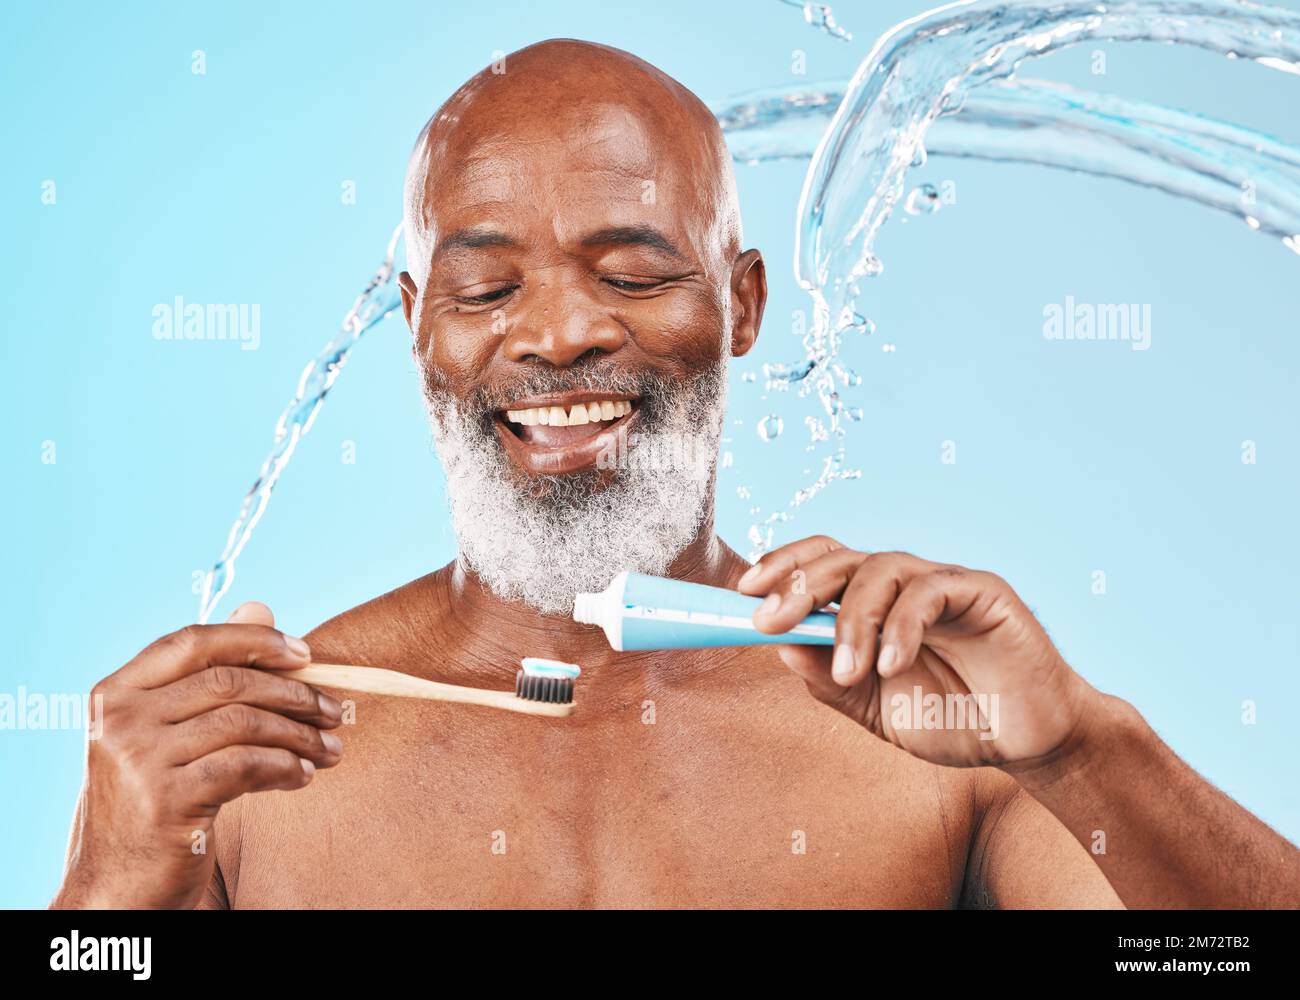 Water, splash and man with dental care in a studio for mouth health and wellness. Toothpaste, toothbrush and elderly African guy brushing his teeth Stock Photo